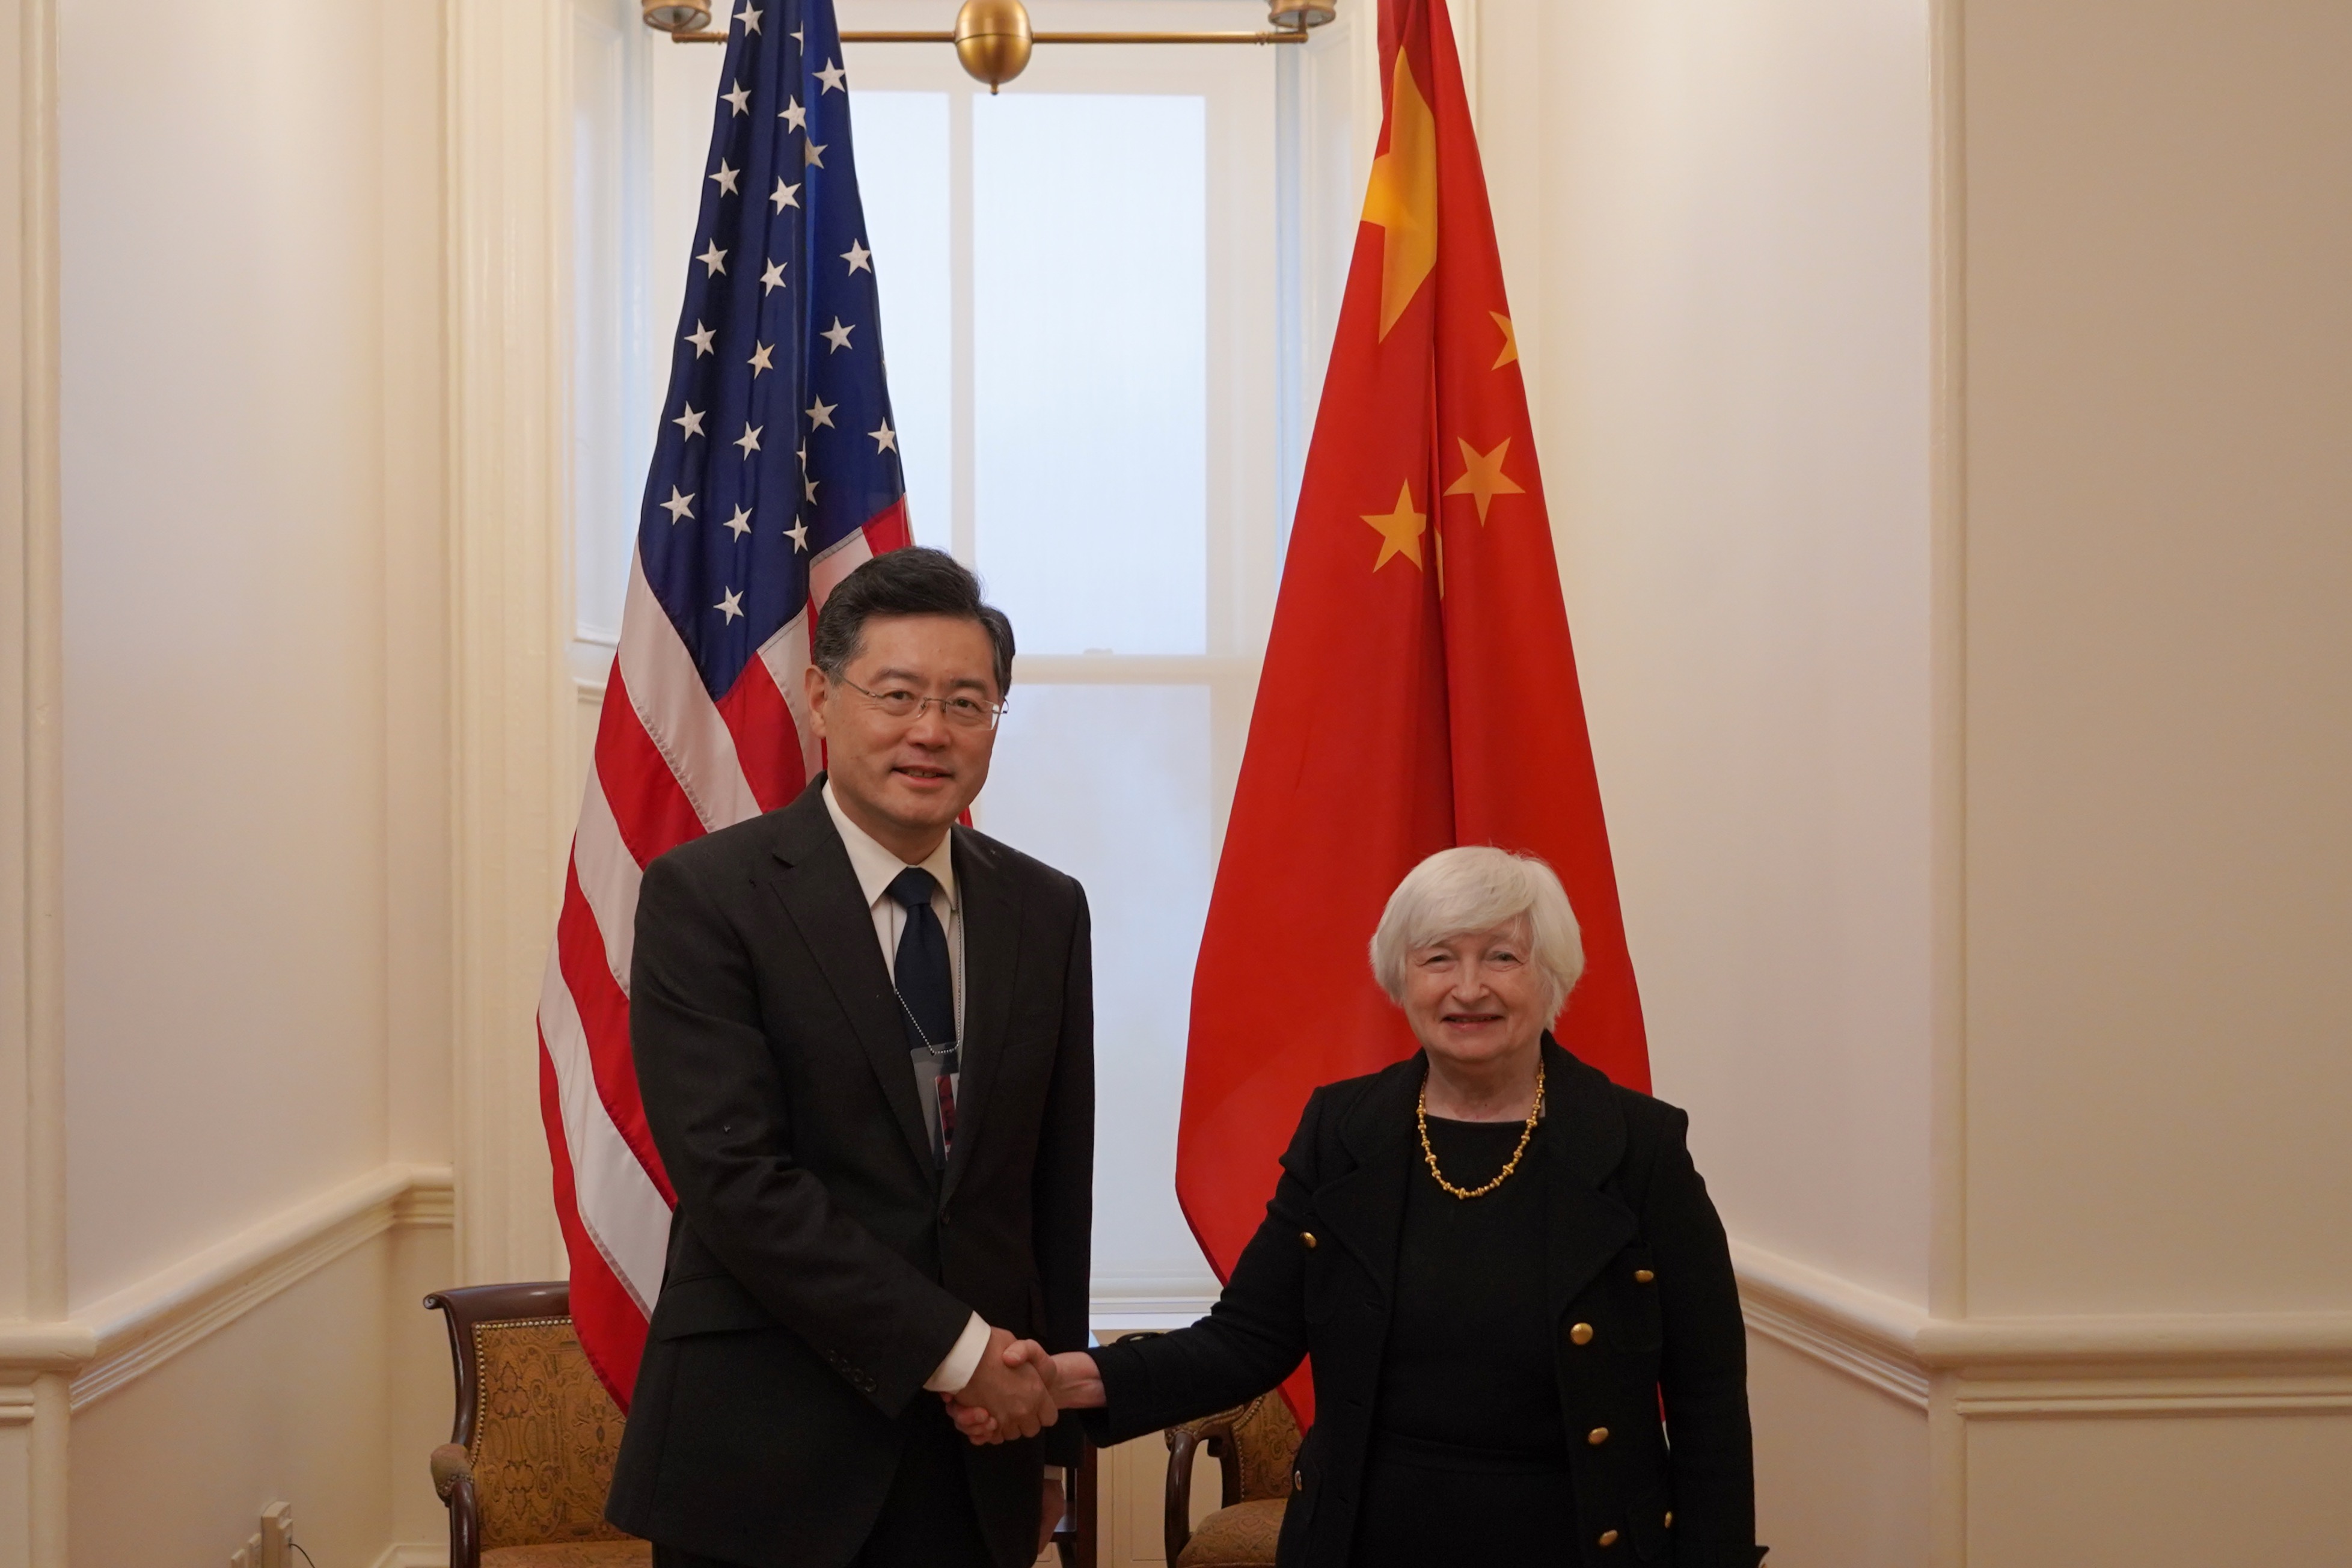 Chinese Ambassador to the U.S. Qin Gang (L) shakes hands with U.S. Secretary of the Treasury Janet Yellen during their meeting in Washington, D.C., the U.S., December 15, 2022. /Chinese embassy in Washington